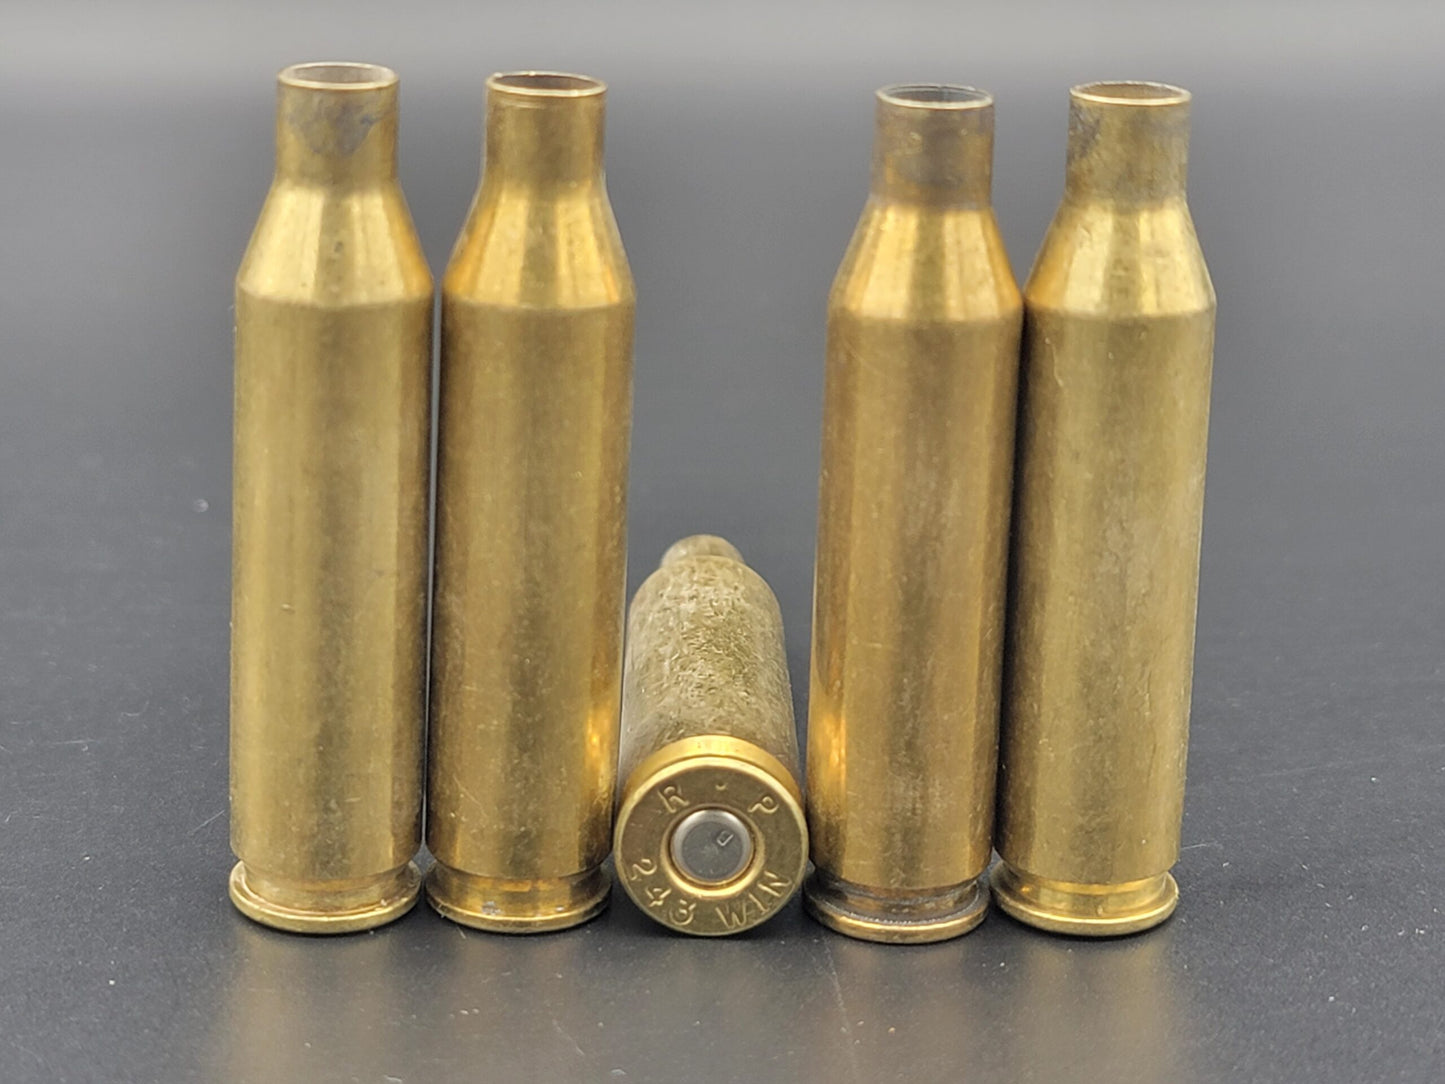 243 Win once fired rifle brass. Hand sorted from reputable indoor/military ranges for reloading. Reliable spent casings for precision shooting.